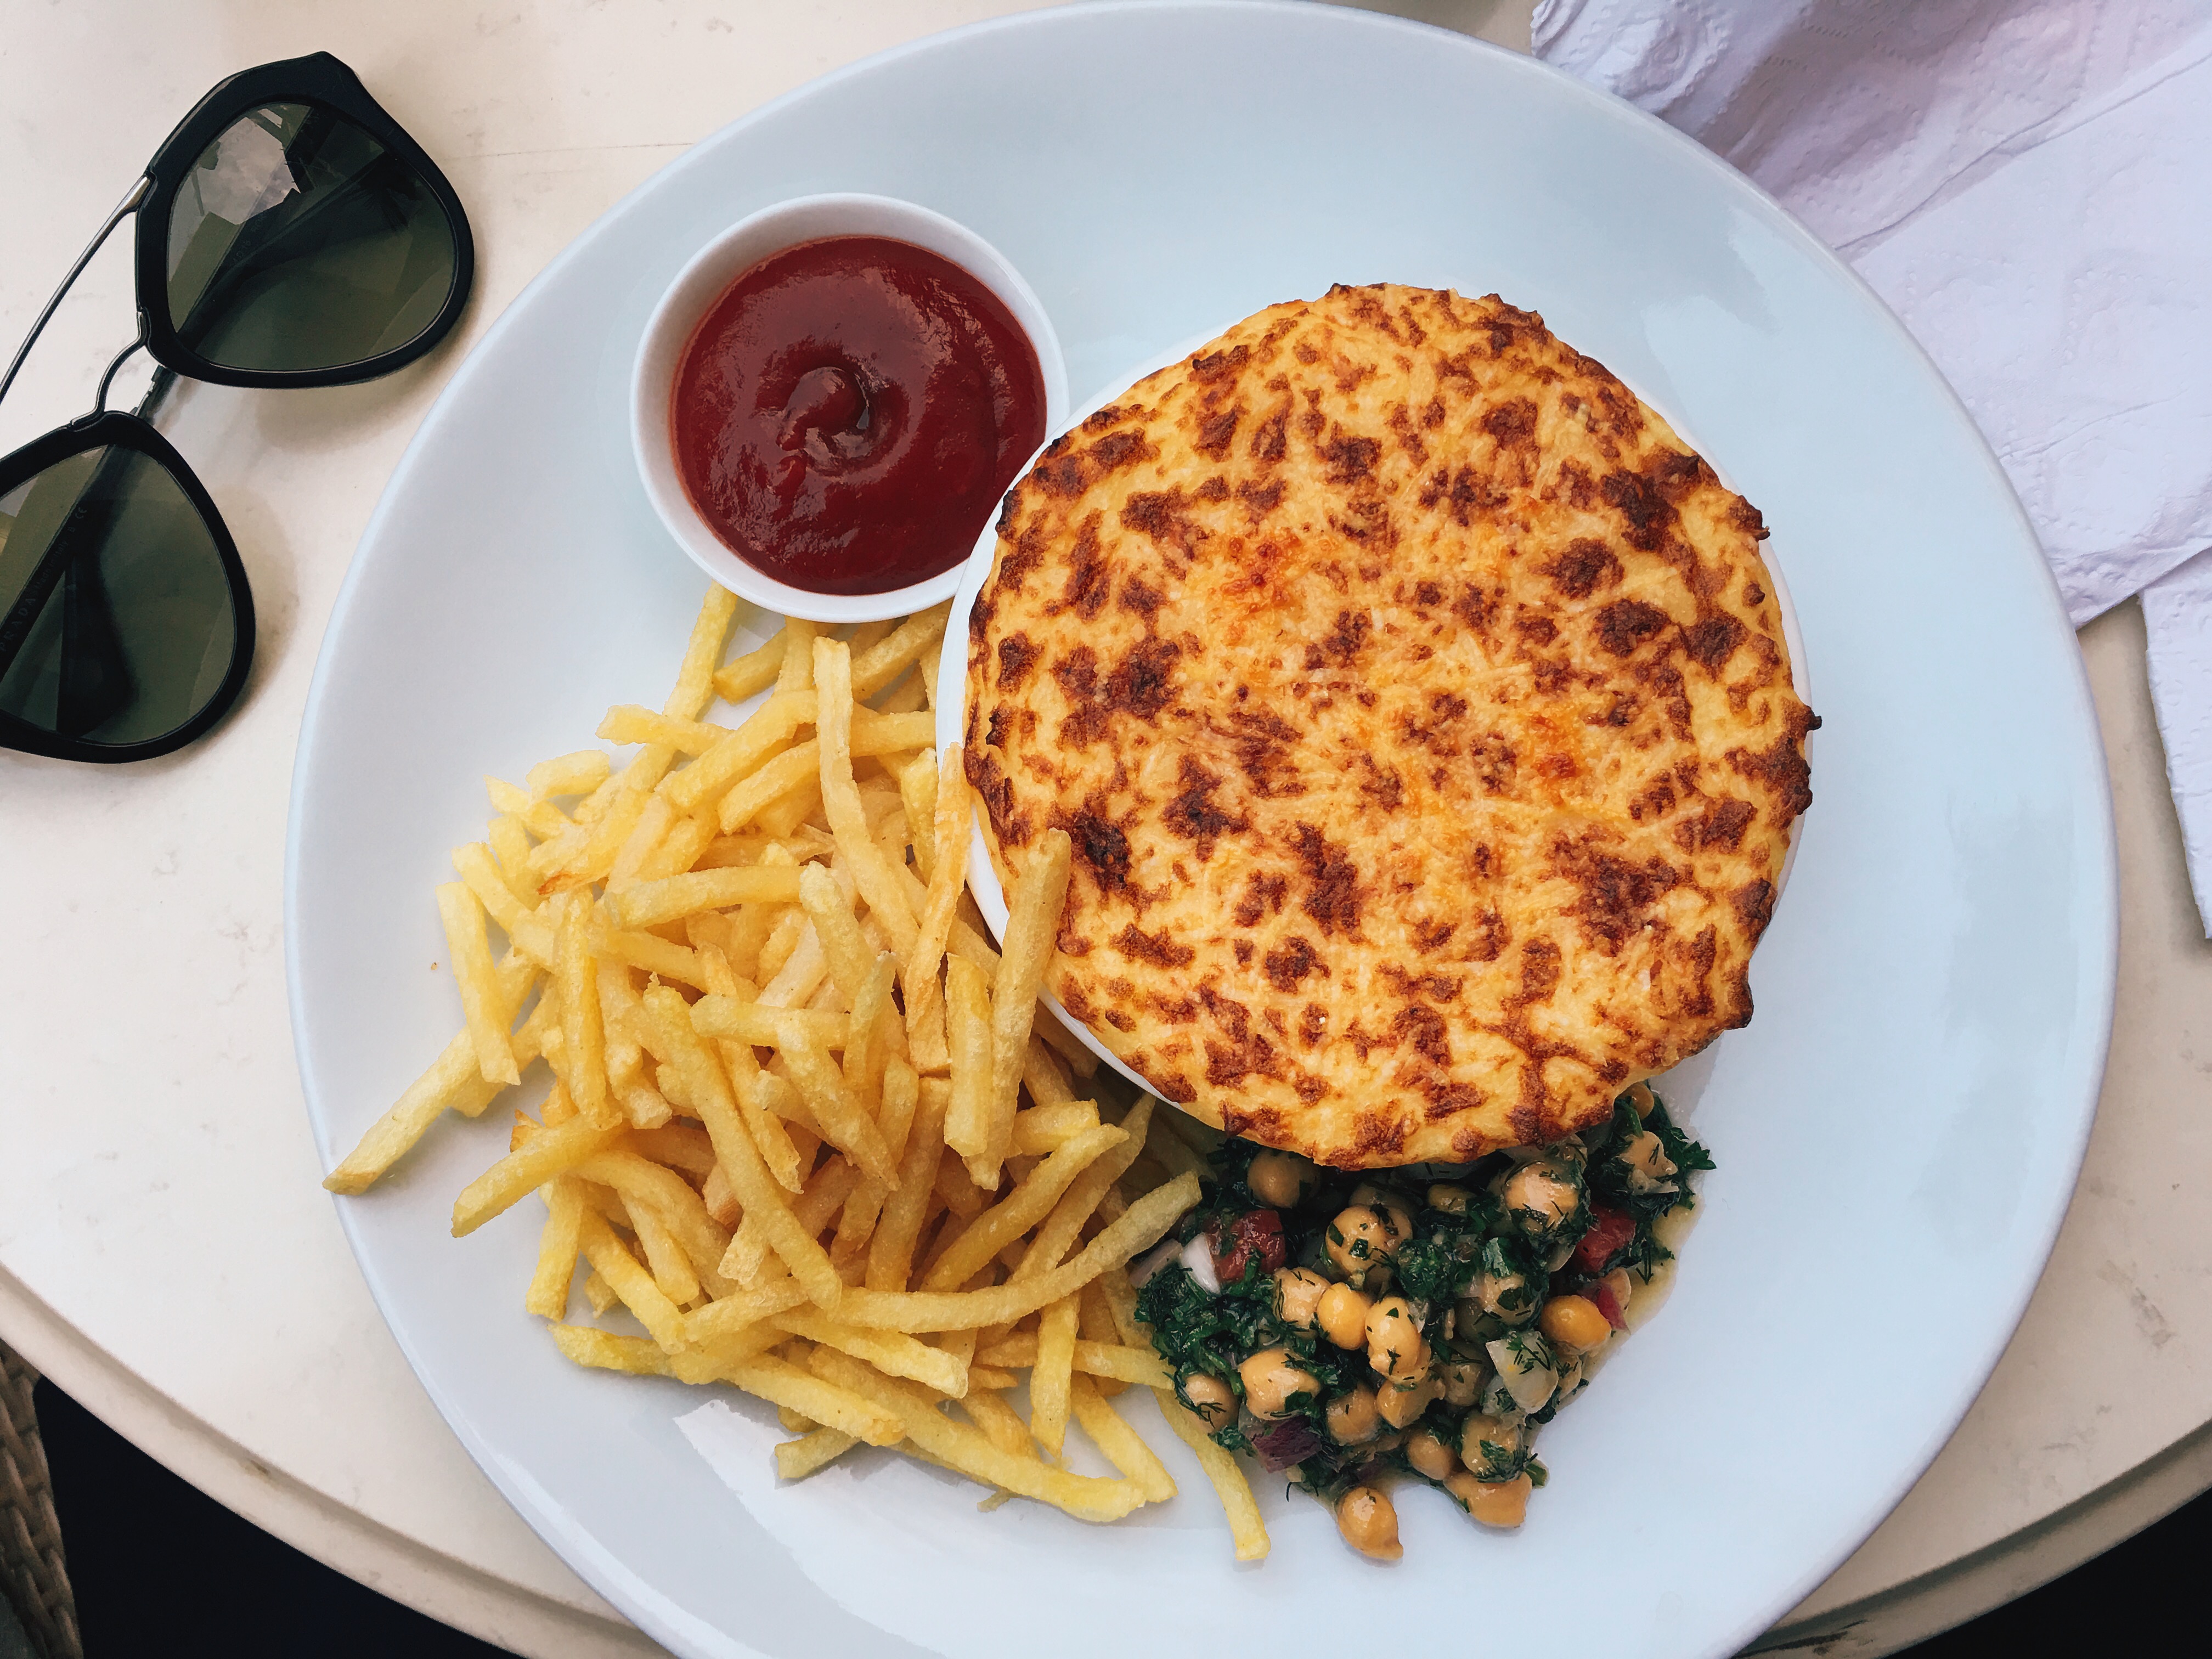 cafesserie, best restaurants places to eat to try in kampala, where to eat in uganda kampala, kampala uganda blogger, food blog kampala uganda